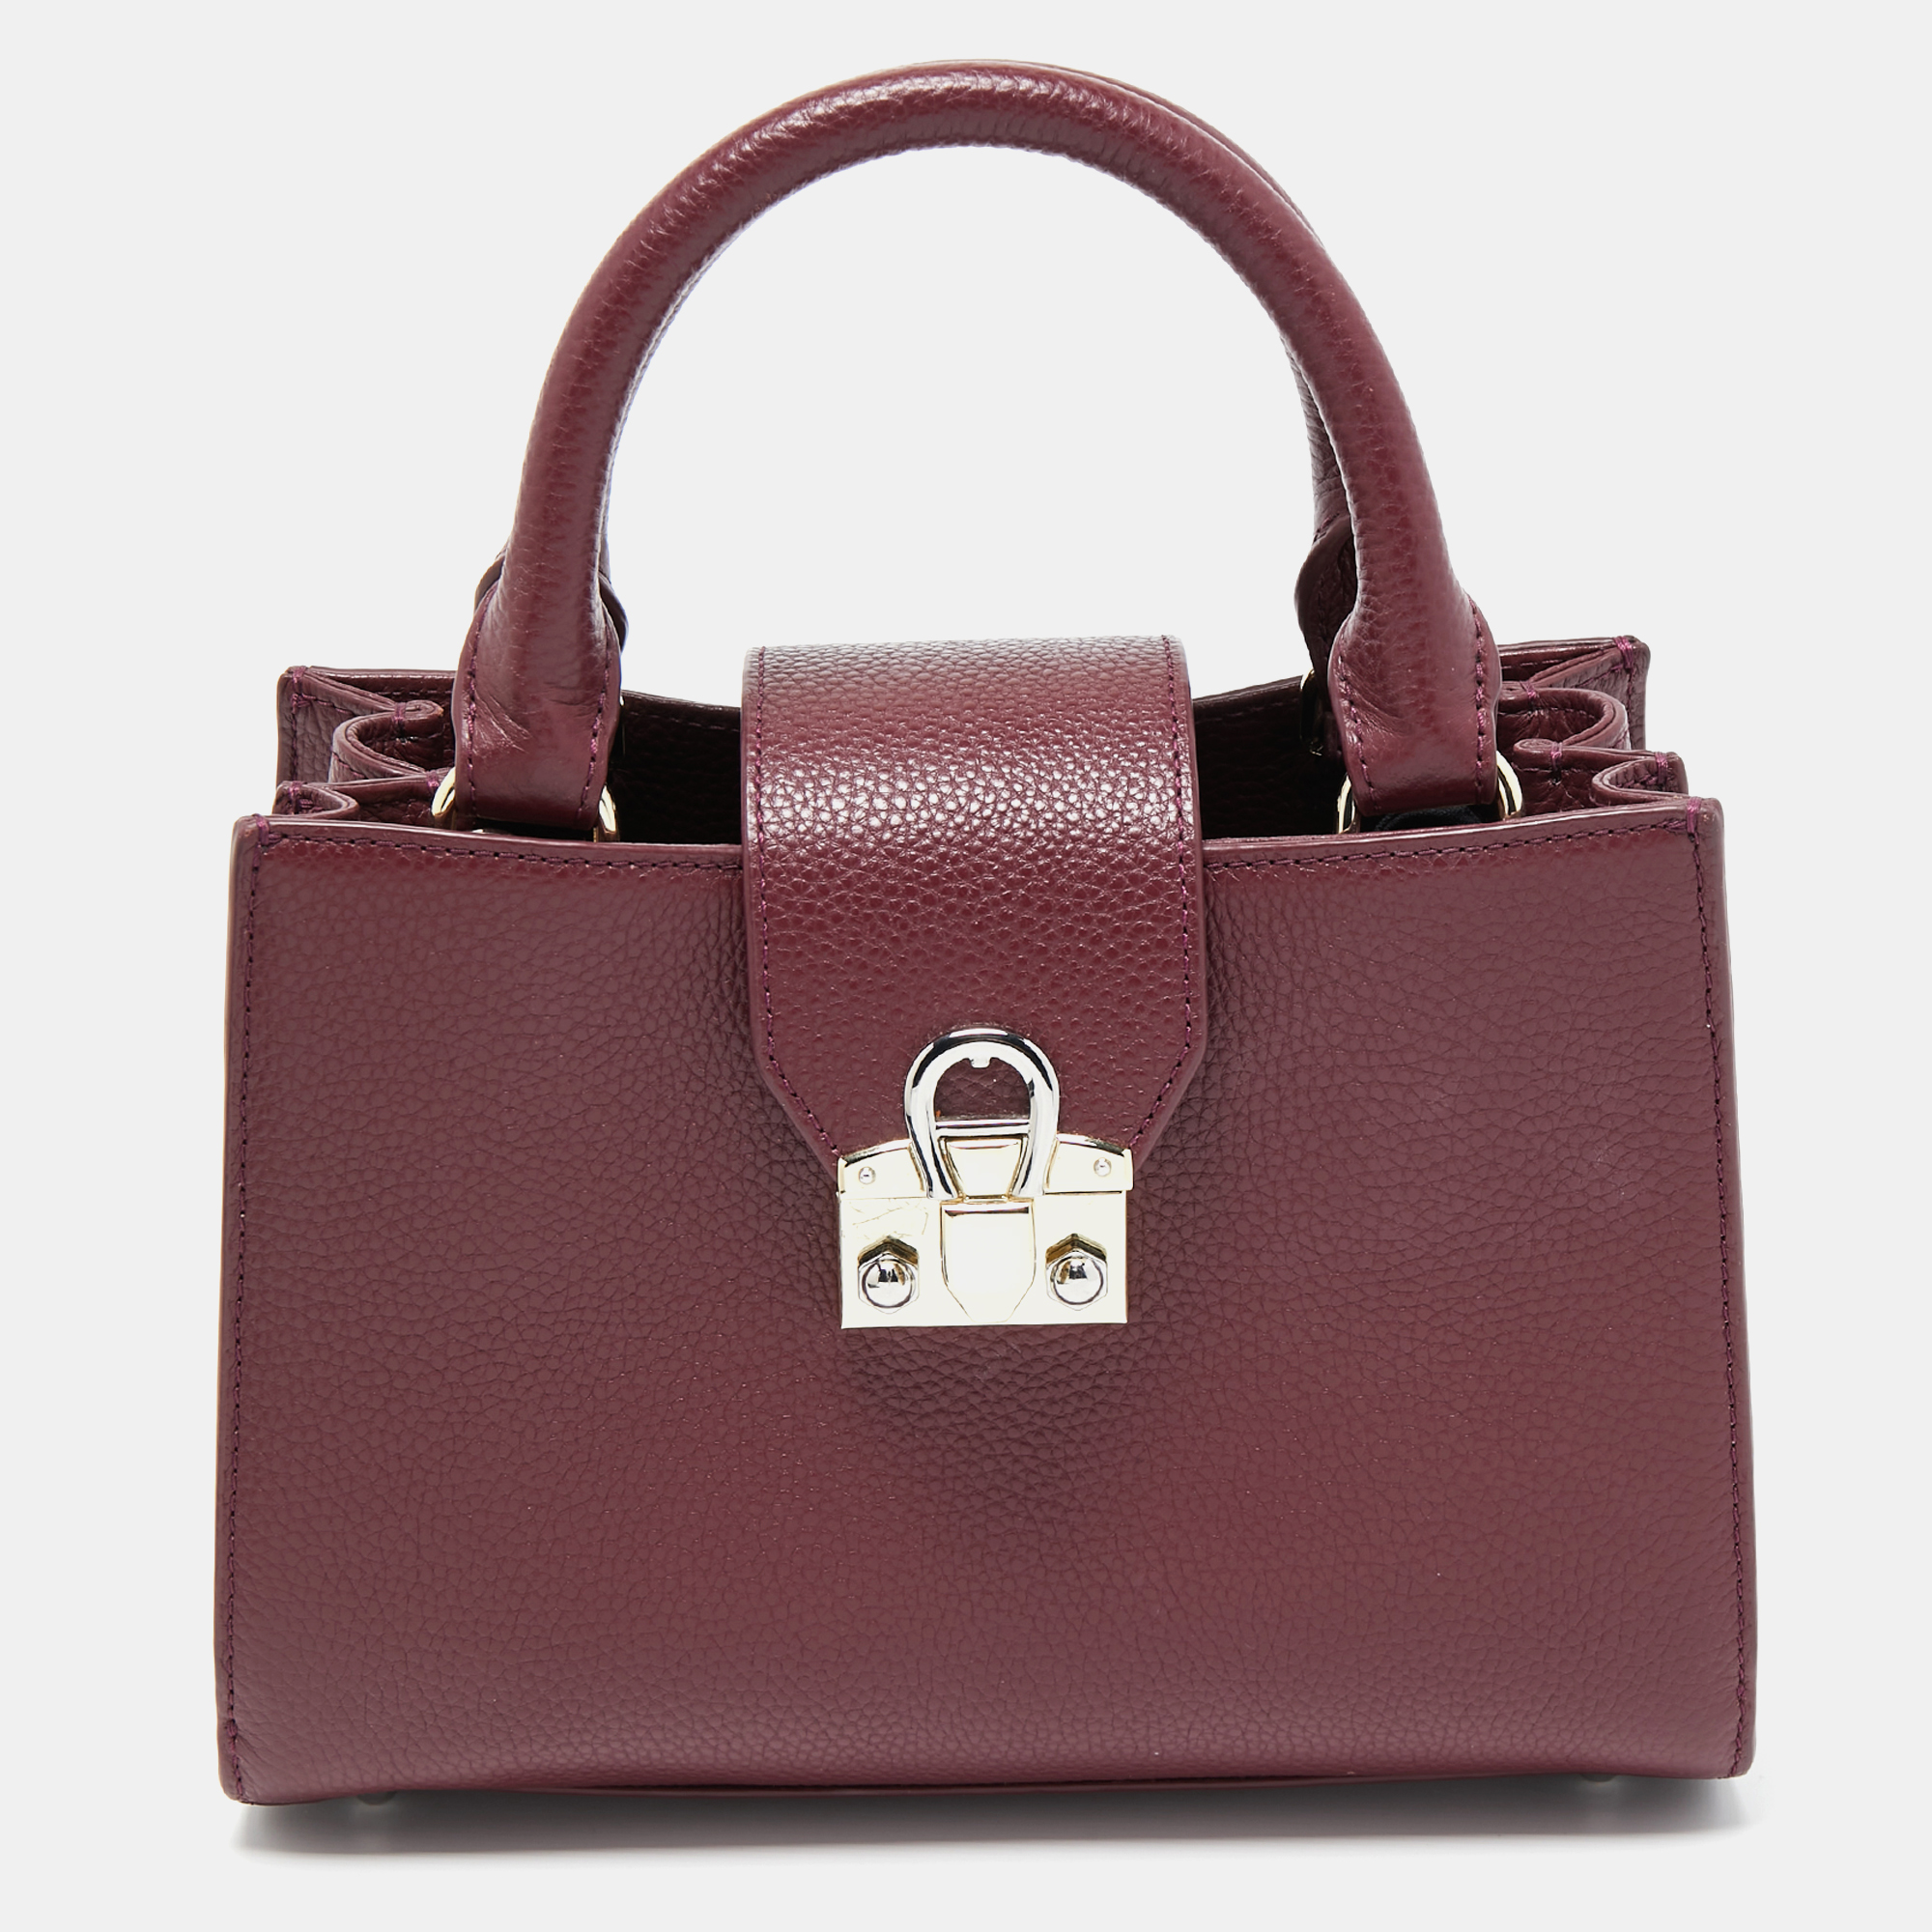 This elegant tote is perfect for your next outing to town. It is made of high quality leather and can match a day or evening outfit. It has two handles and a shiny metal clasp.